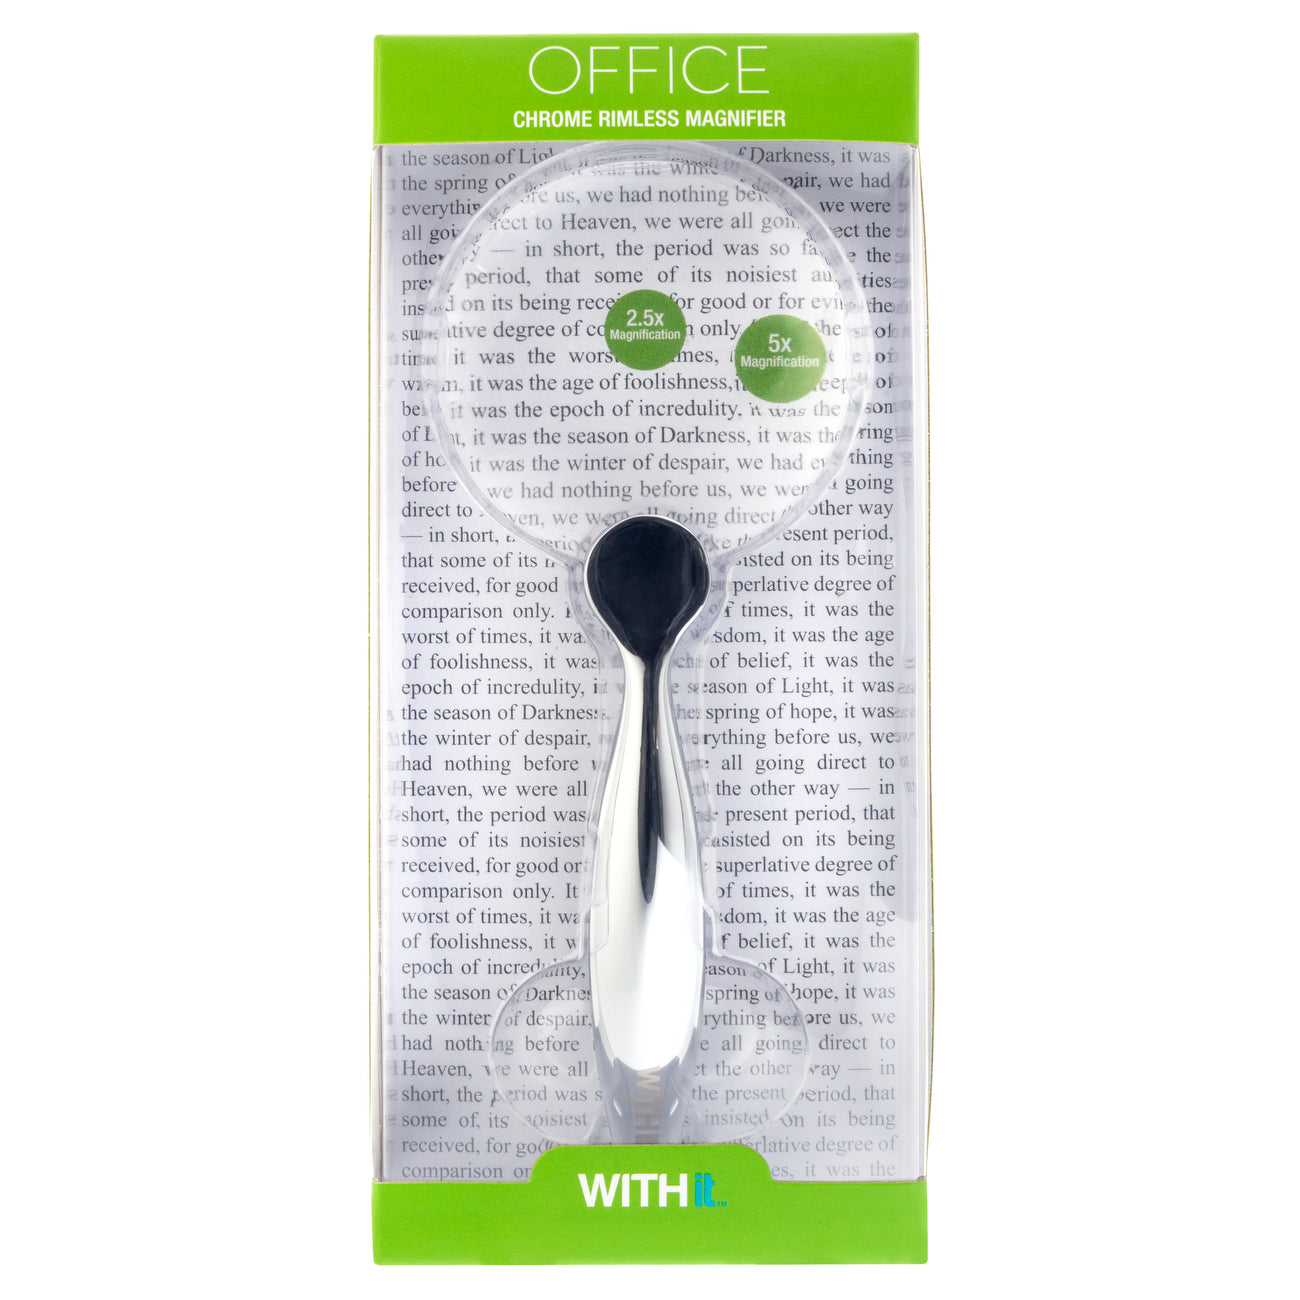 Office Chrome Rimless Magnifier